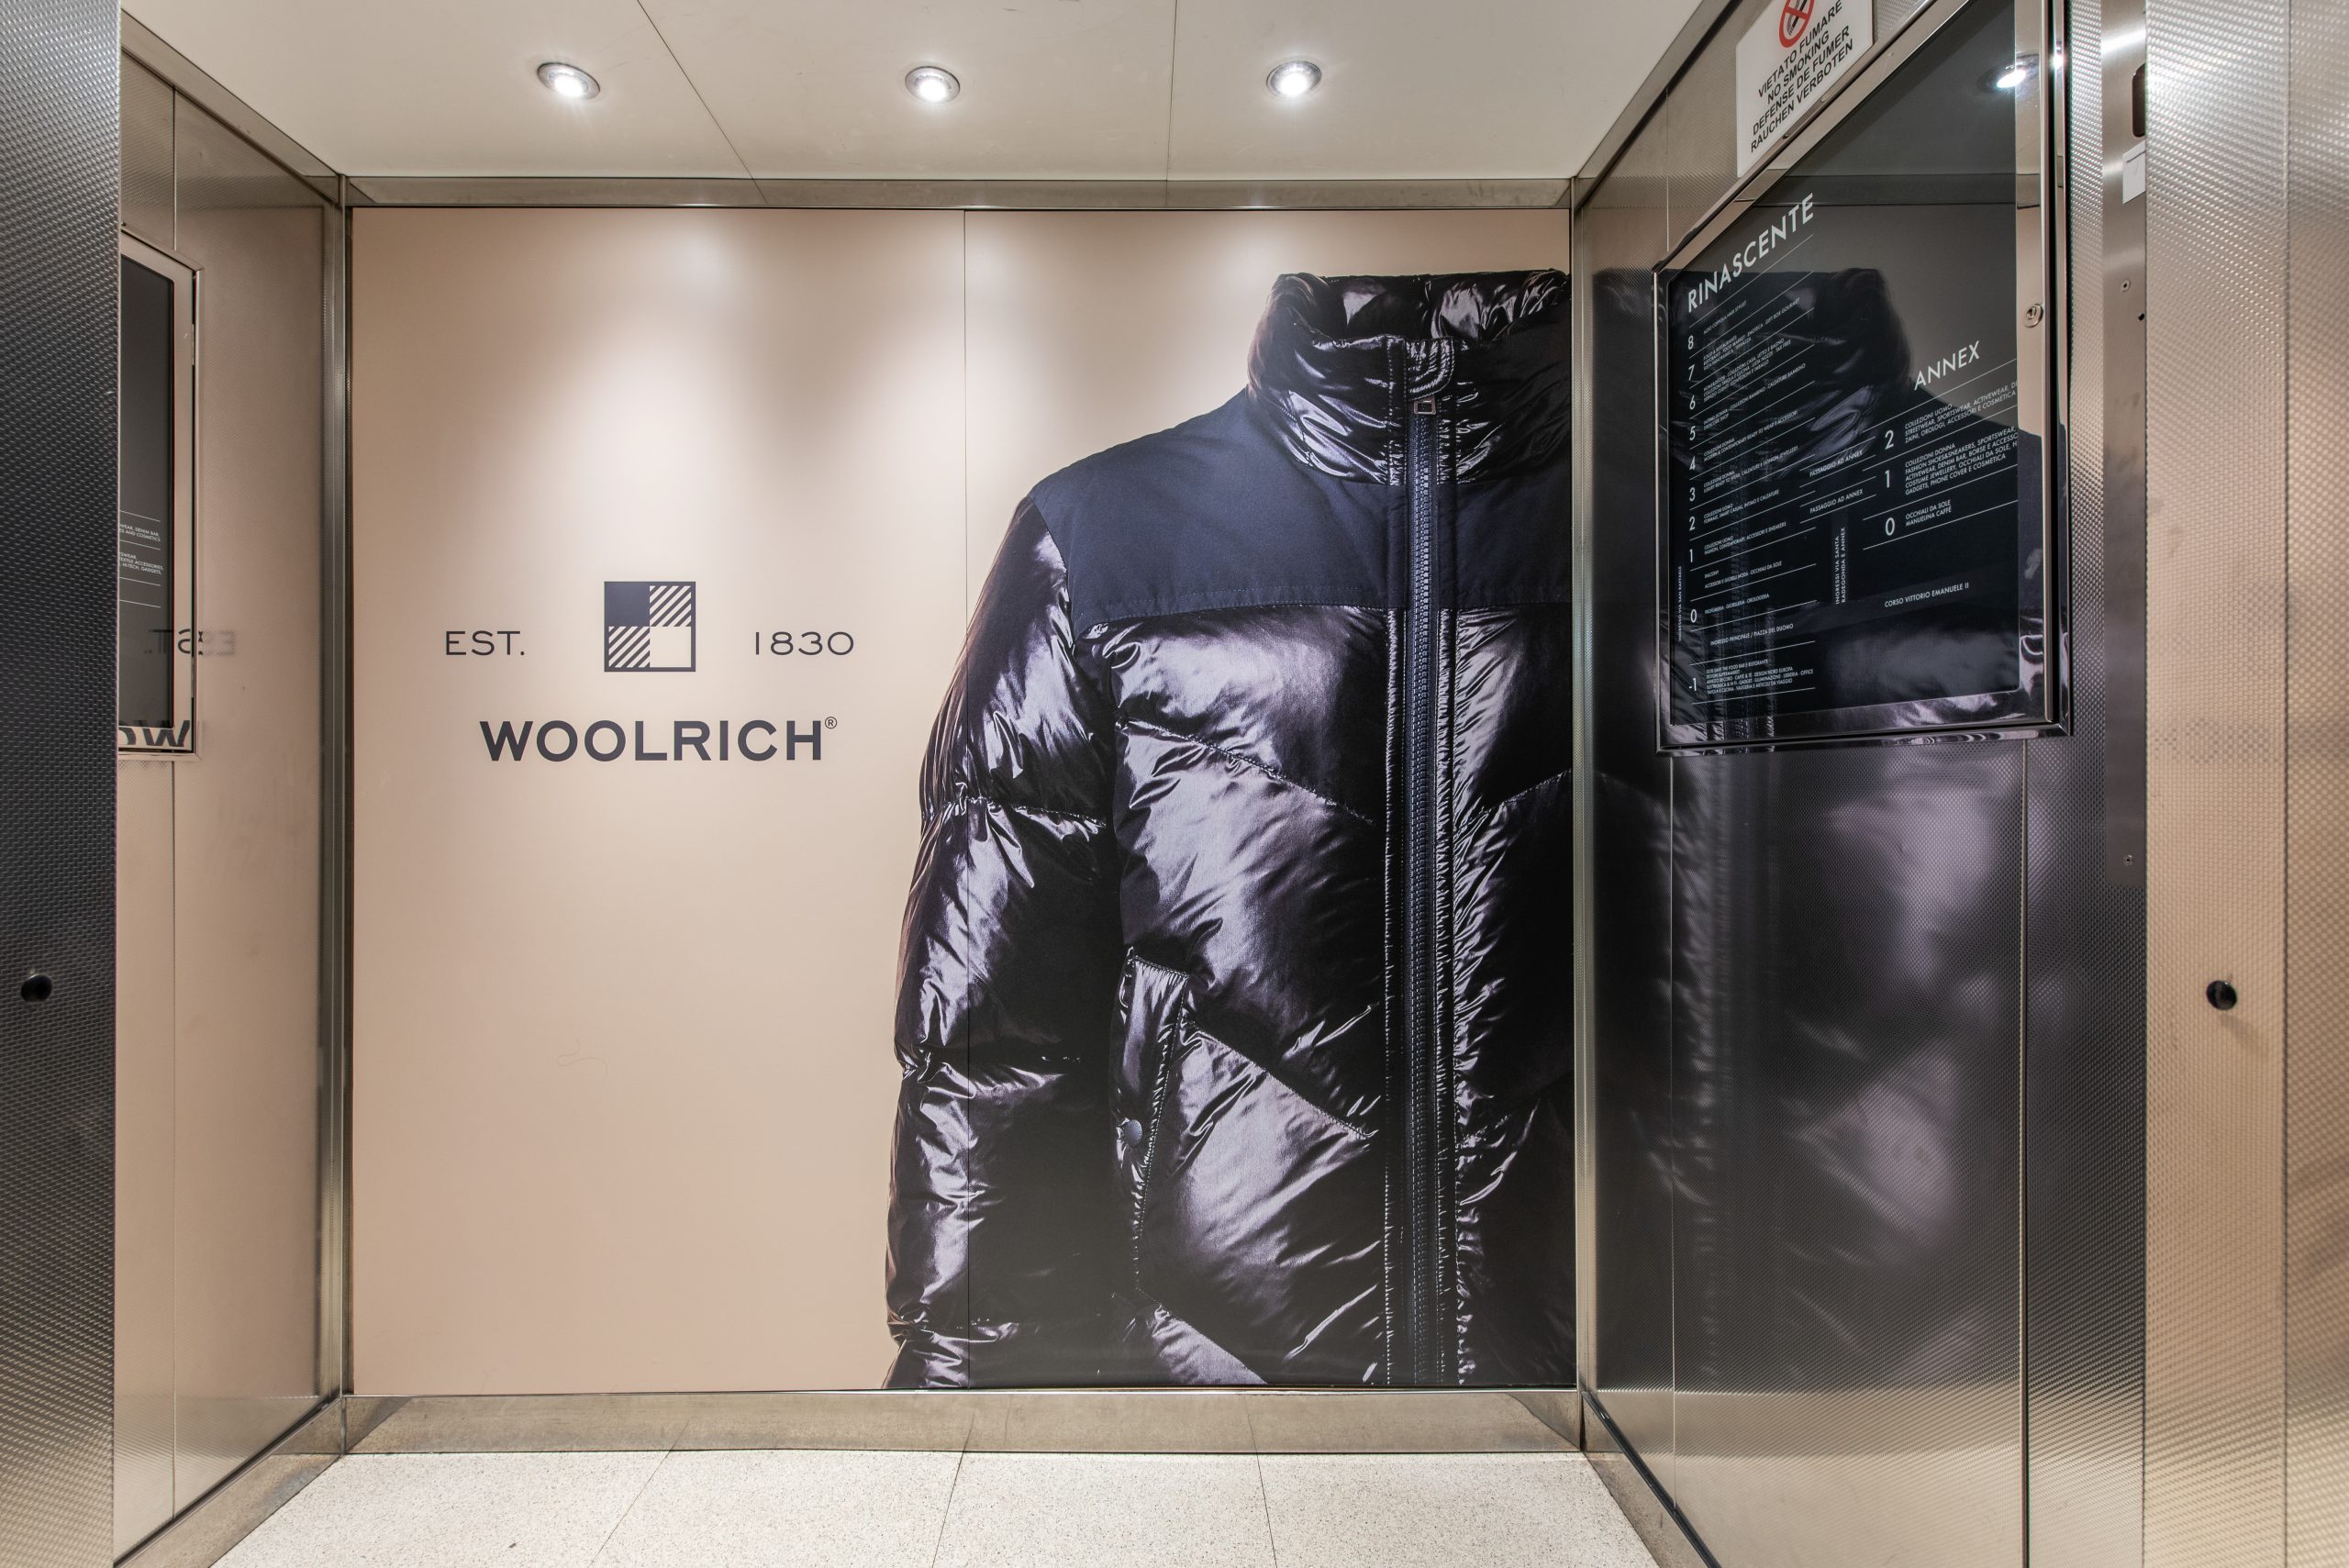 Woolrich images in elevator at Rinascente, Milano